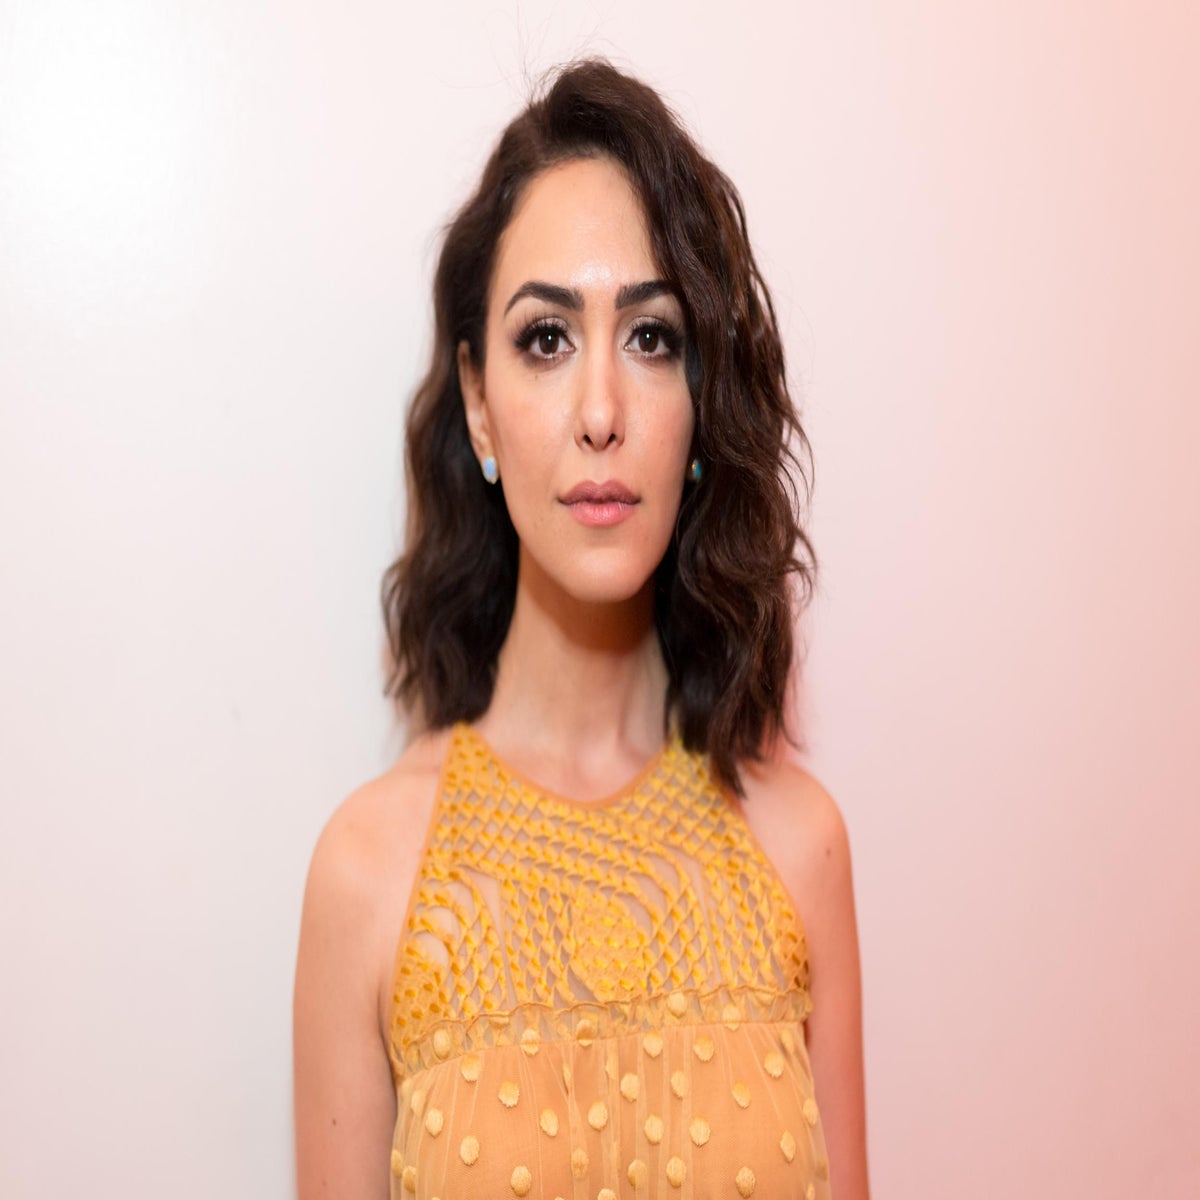 Porno Iranian 2019 - Hotel Mumbai star Nazanin Boniadi: 'We're fighting inequality in the west,  but in Iran it's a chasm' | The Independent | The Independent